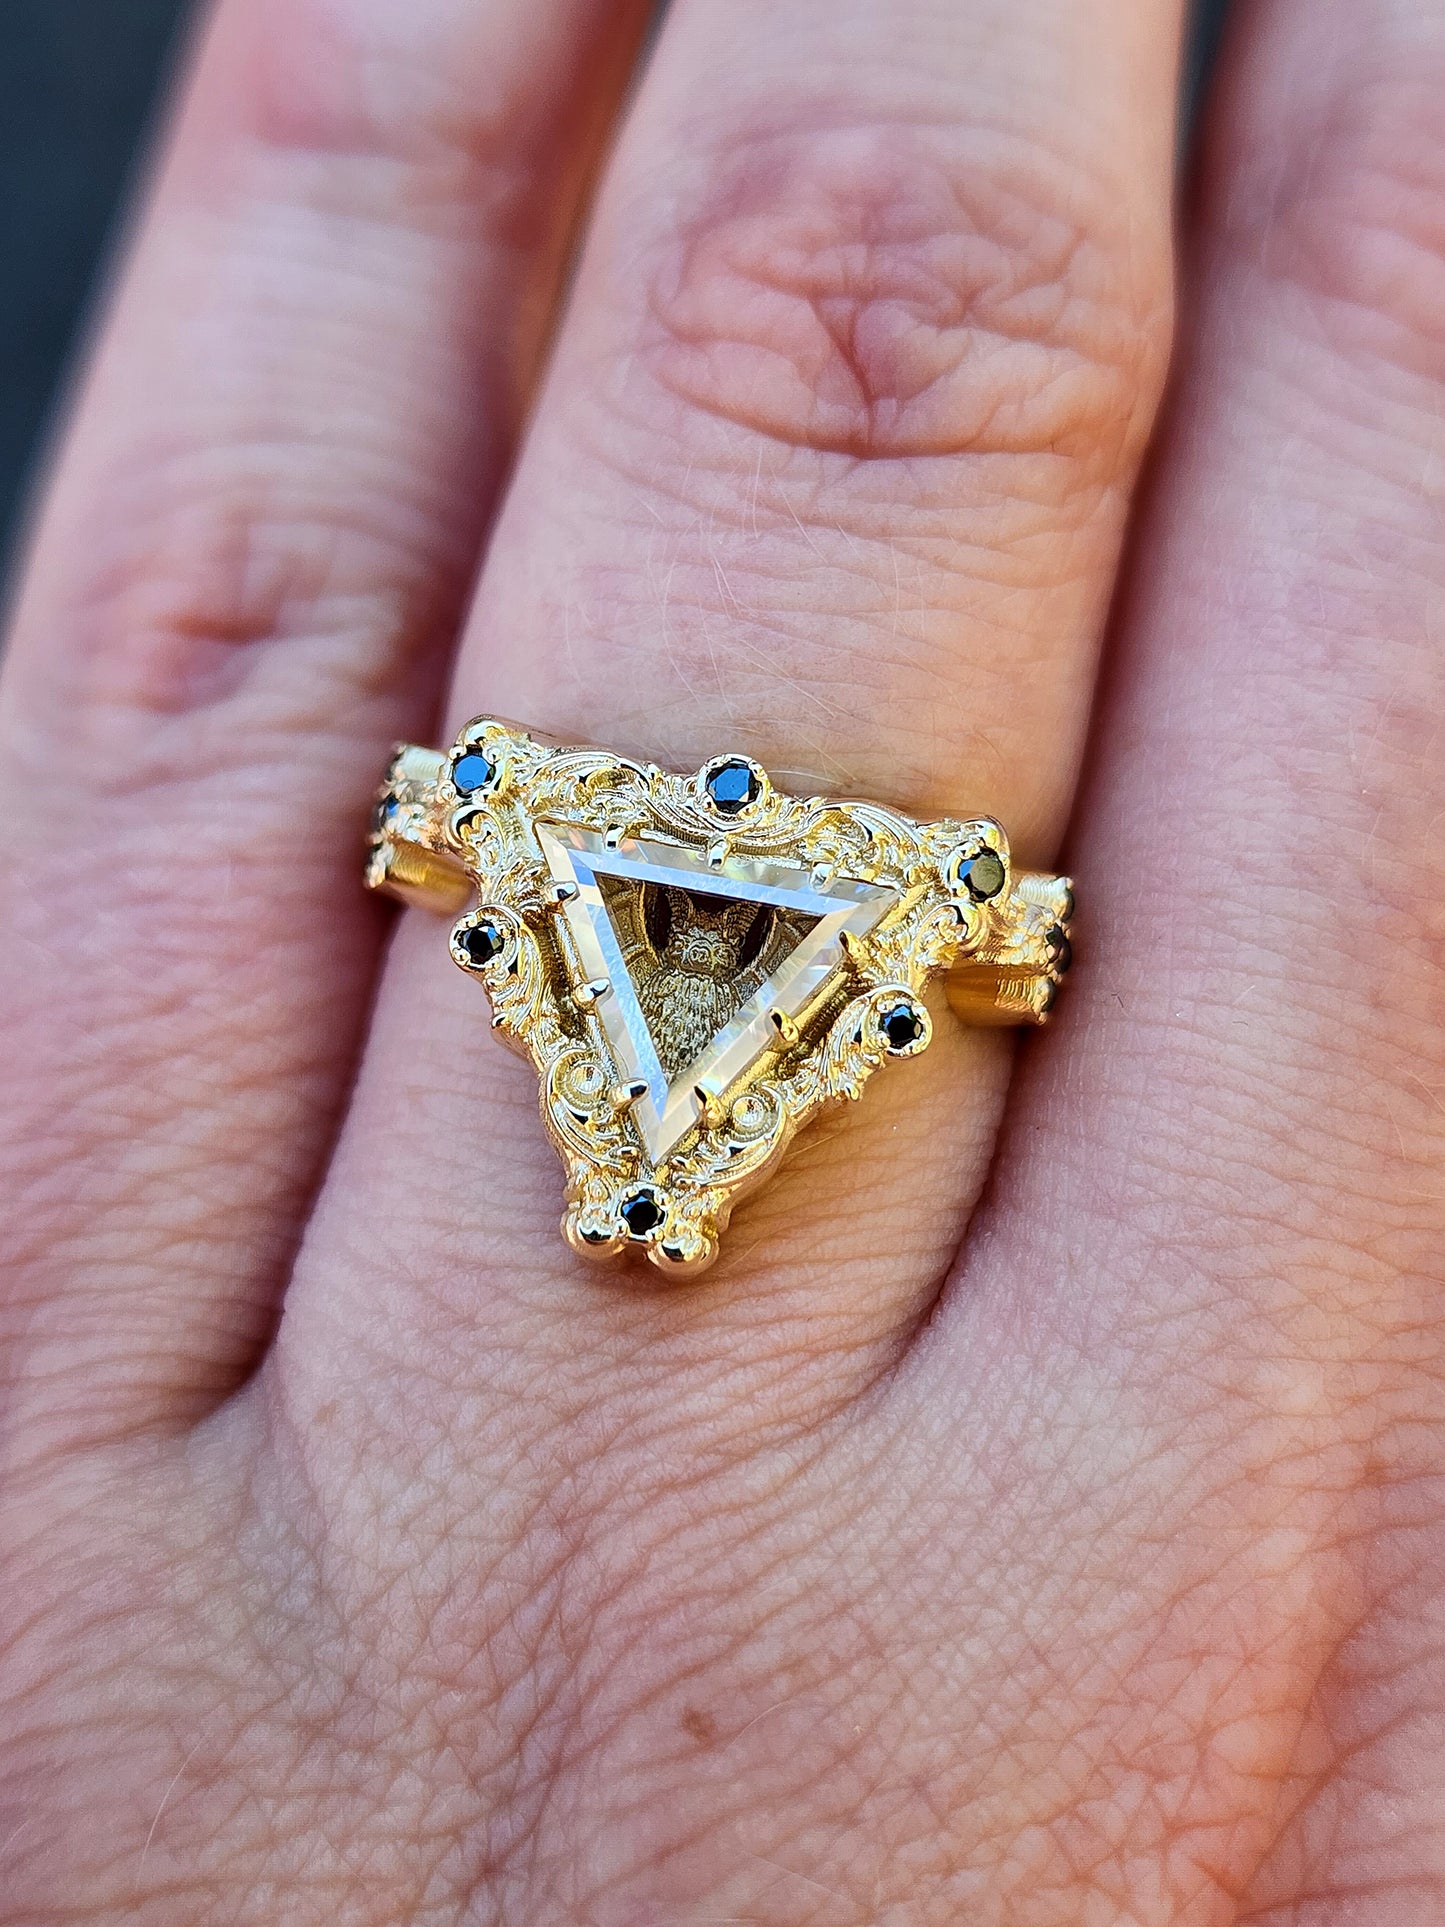 Victorian Gothic Bat Engagement Ring Shadow Box with Triangle Portrait Cut Moissanite Wedding Ring Set Baroque Scrolls with Black or White Diamonds 14k Gold Ethereal Unique Fine Jewelry